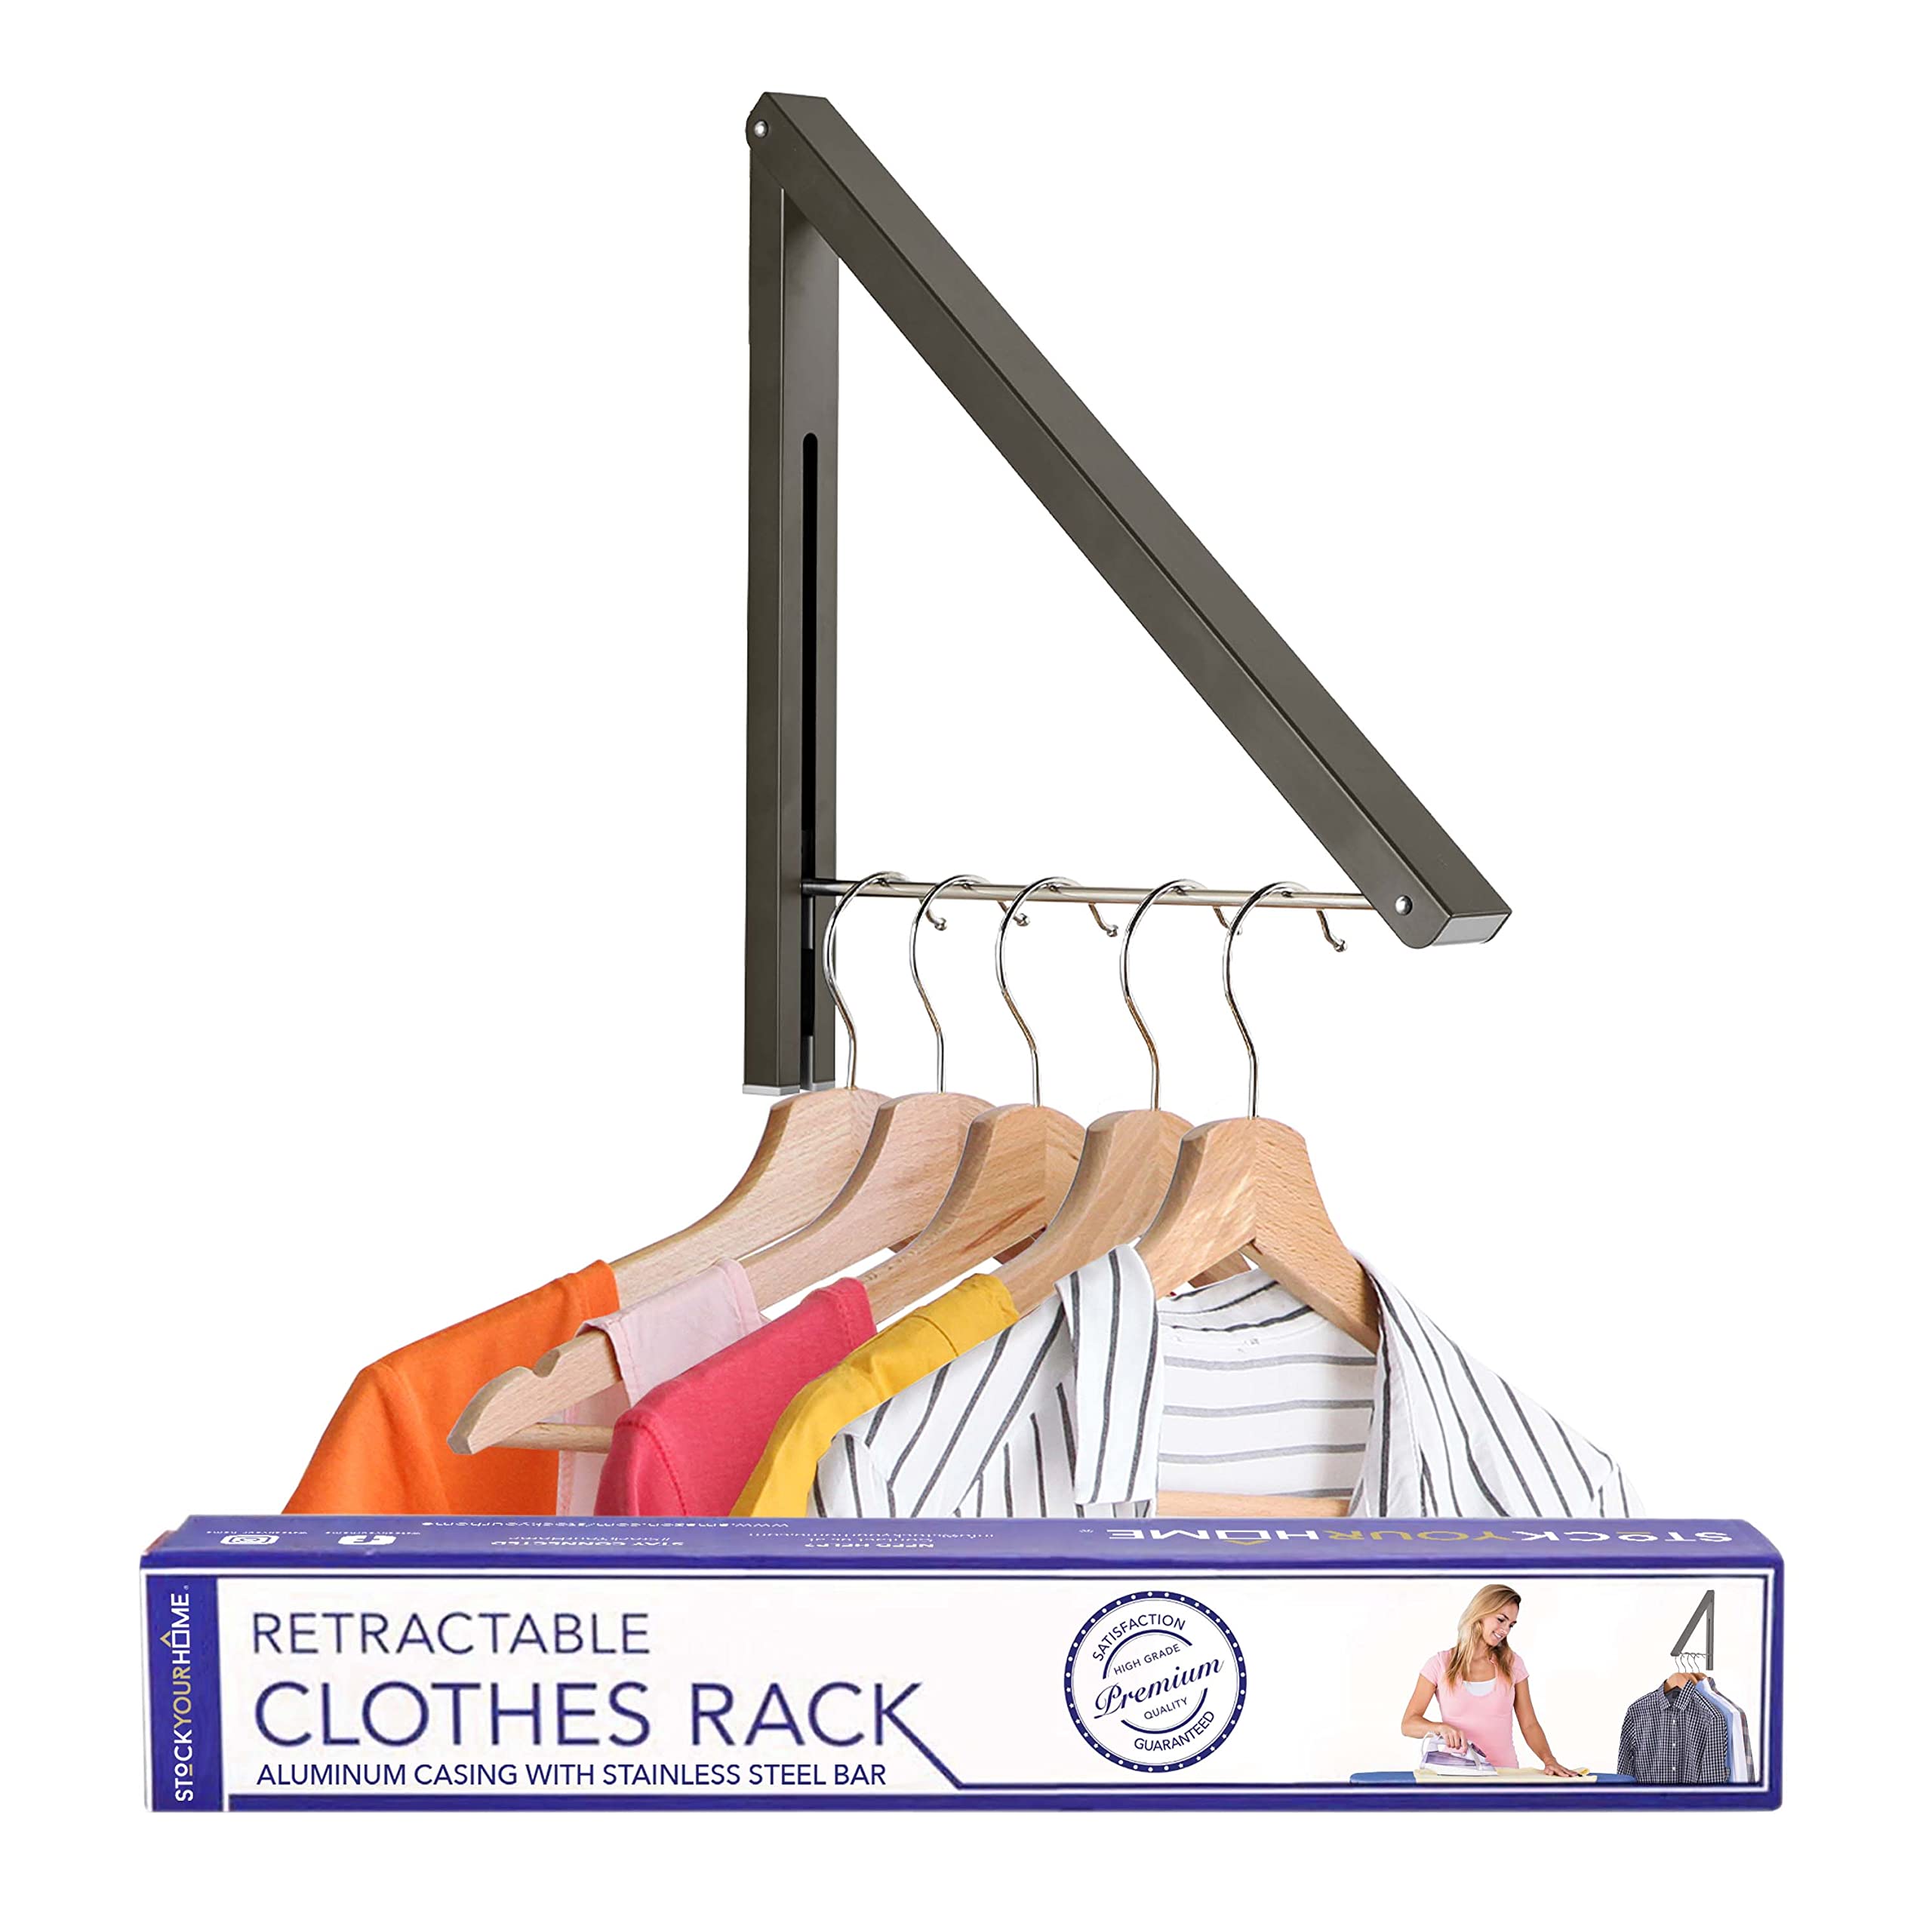 Stock Your Home Single Foldable Clothing Rack, Wall-Mounted Retractable Clothes Hanger for Laundry Dryer Room, Hanging Drying Rod, Small Collaps